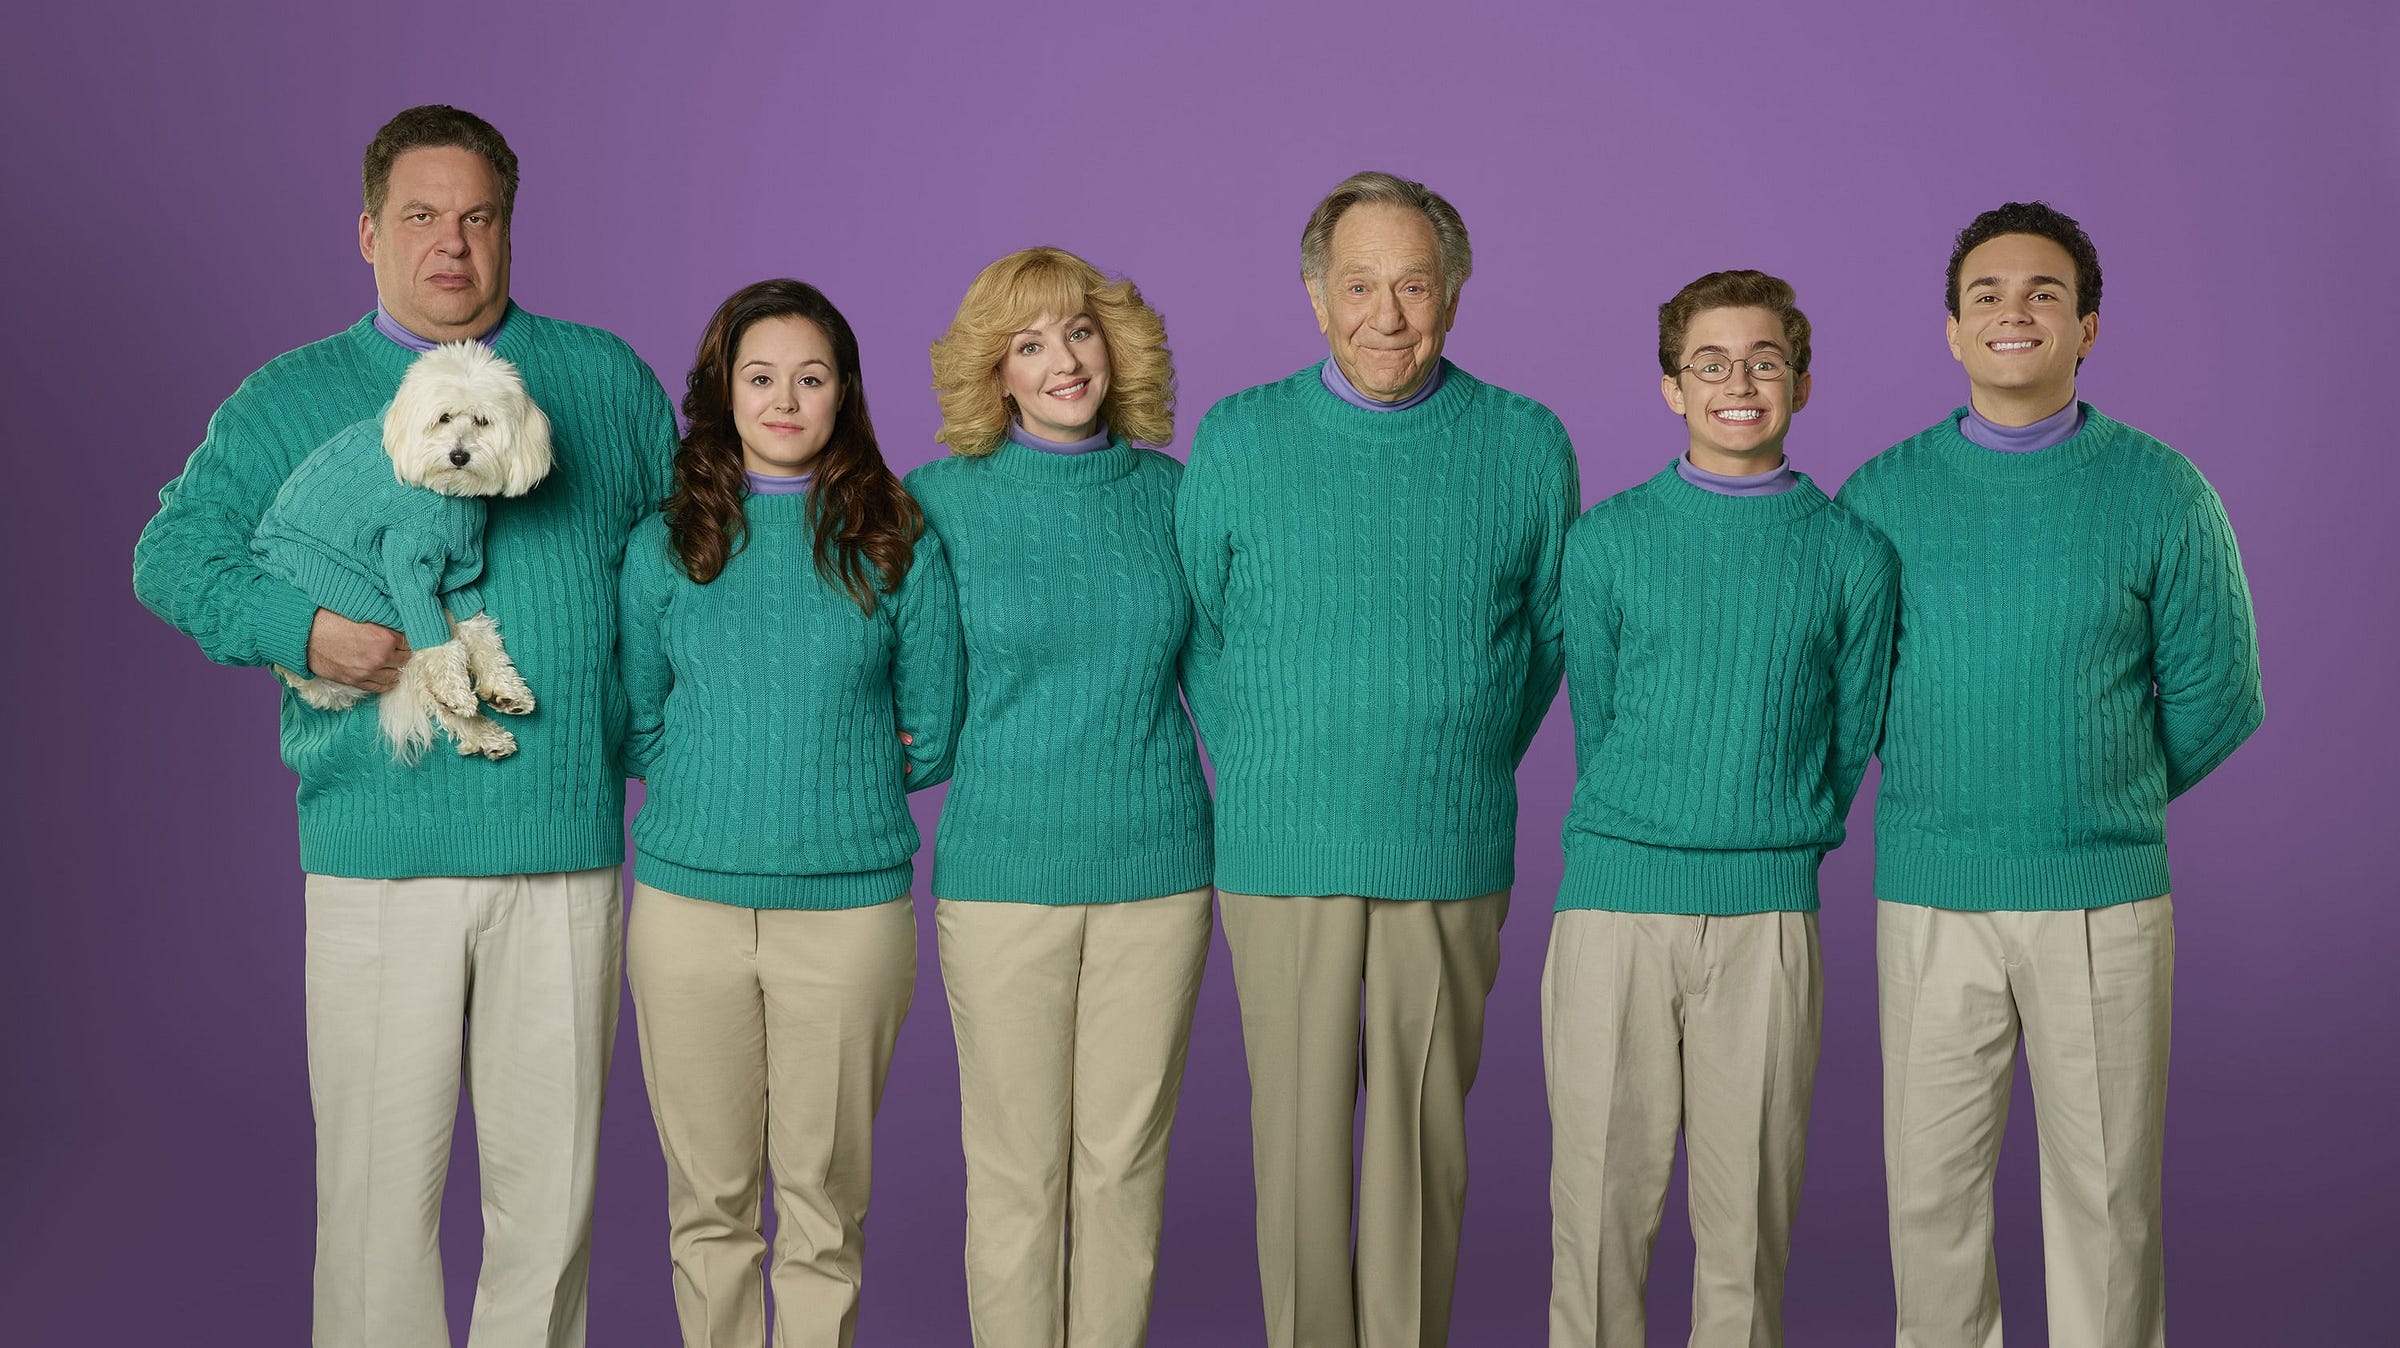 About - The Goldbergs - Series 9 Ep 1 Full Episodes - Medium.